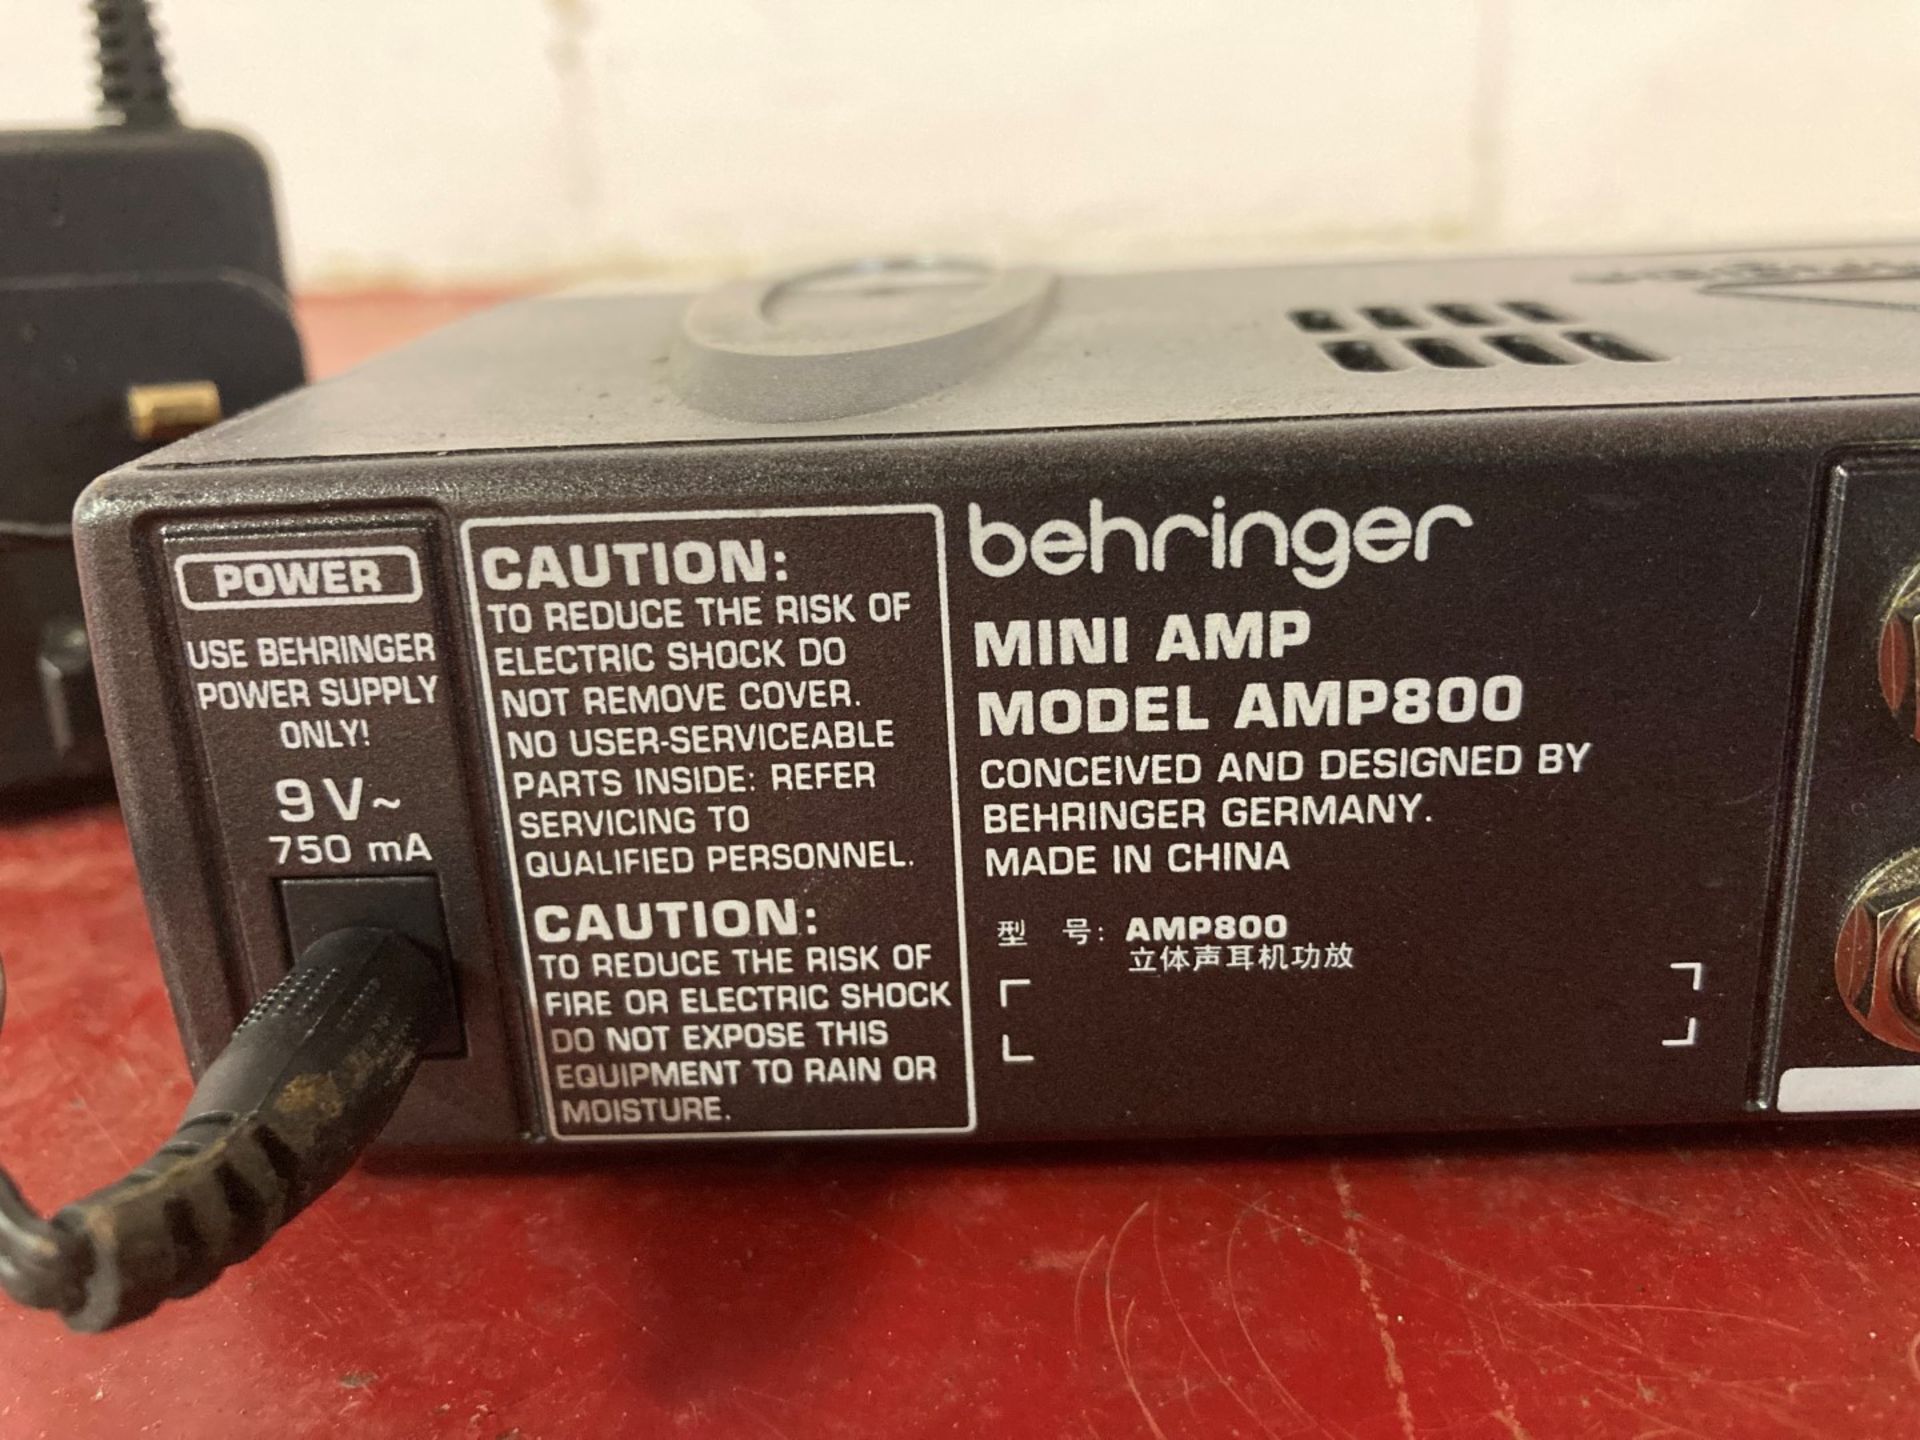 Behringer Amp800 four channel headphone amplifier - Image 3 of 3